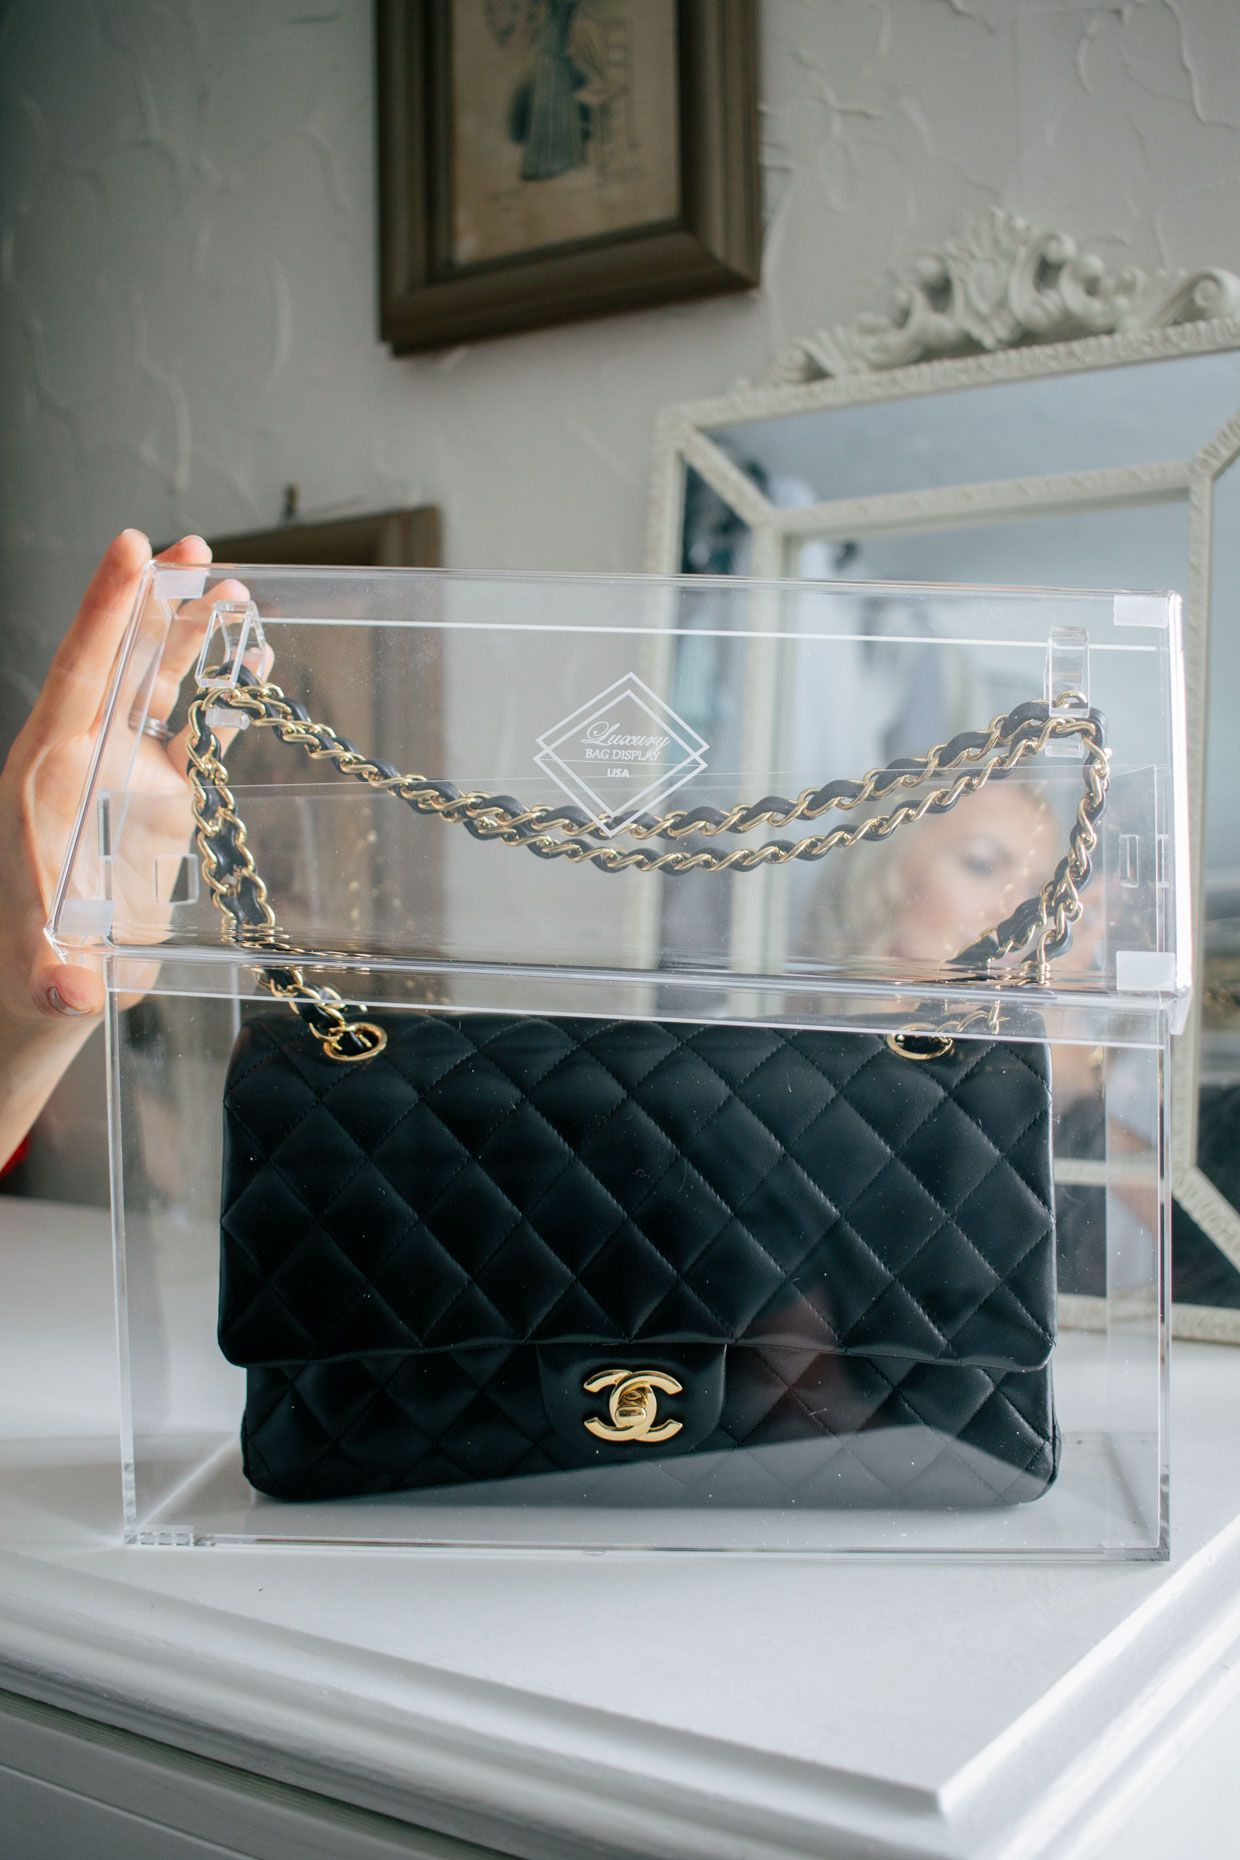 Meagan Brandon fashion blogger shows best way to preserve and store Chanel handbags with Luxury Bag Display case